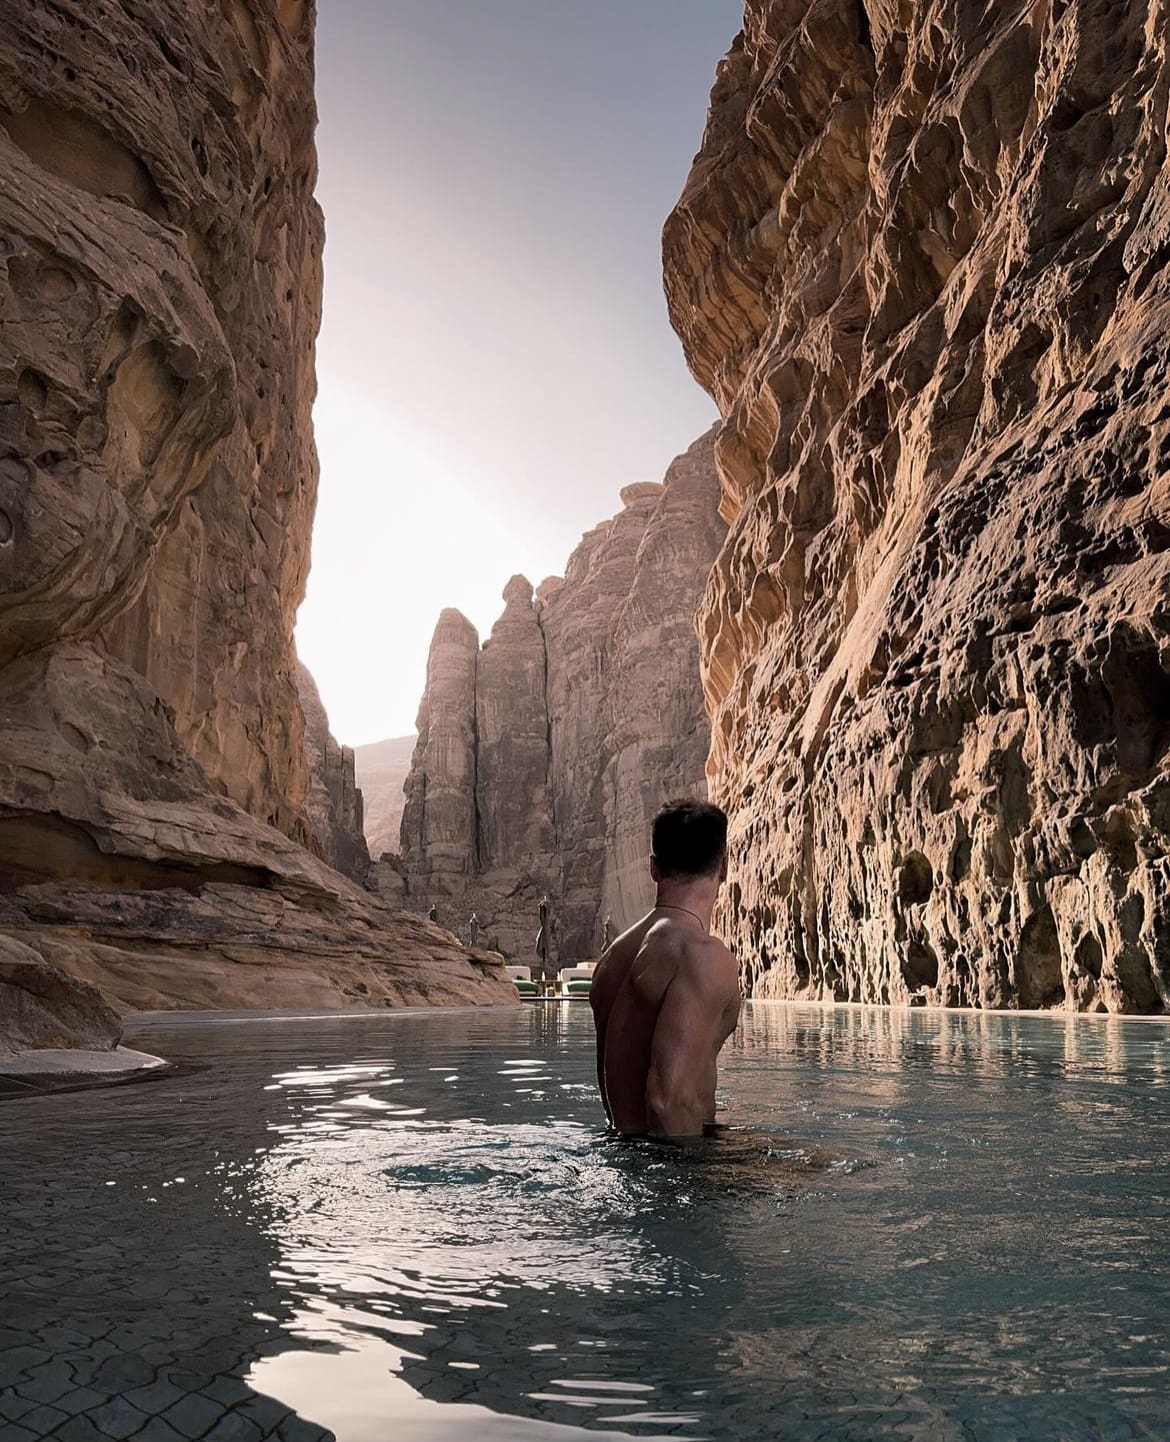 Swimming in between the mystic rocks of AlUla